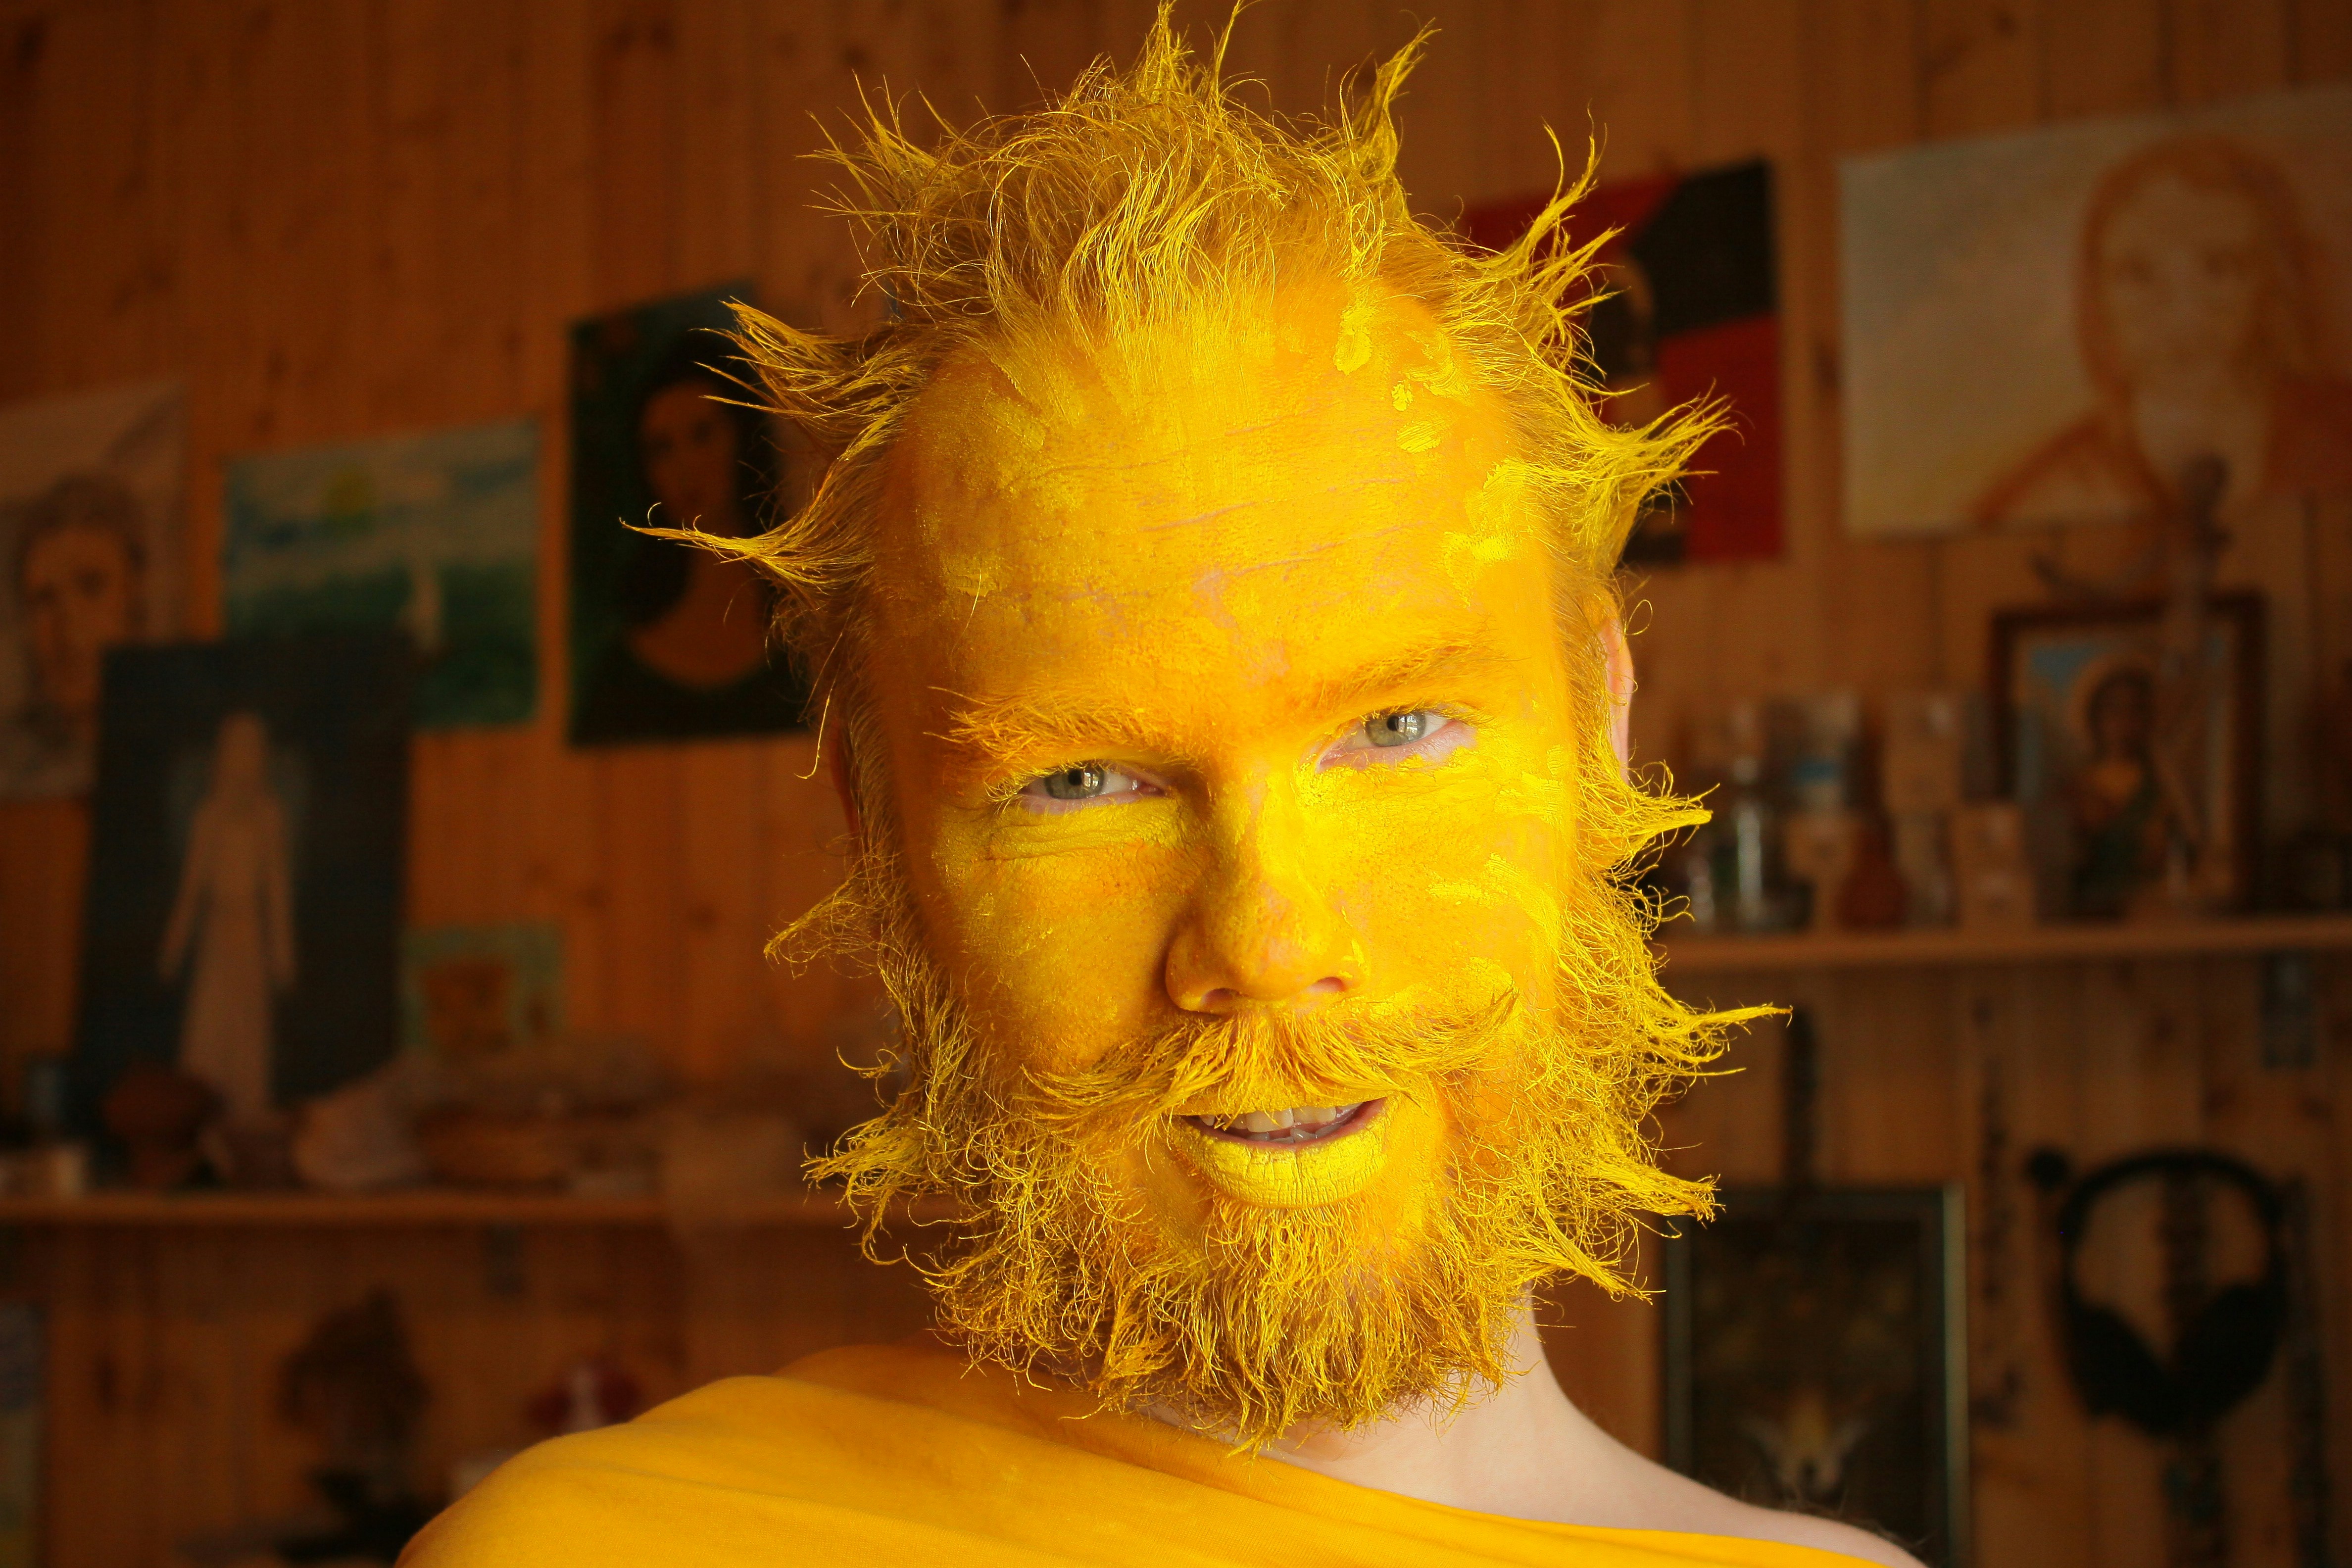 Carnival image of the sun. The man's face is painted bright yellow, and his hair and beard are laid in rays. • Карнавальный образ солнца. Лицо мужчины выкрашено в яркий желтый цвет, а волосы и борода уложены лучиками.